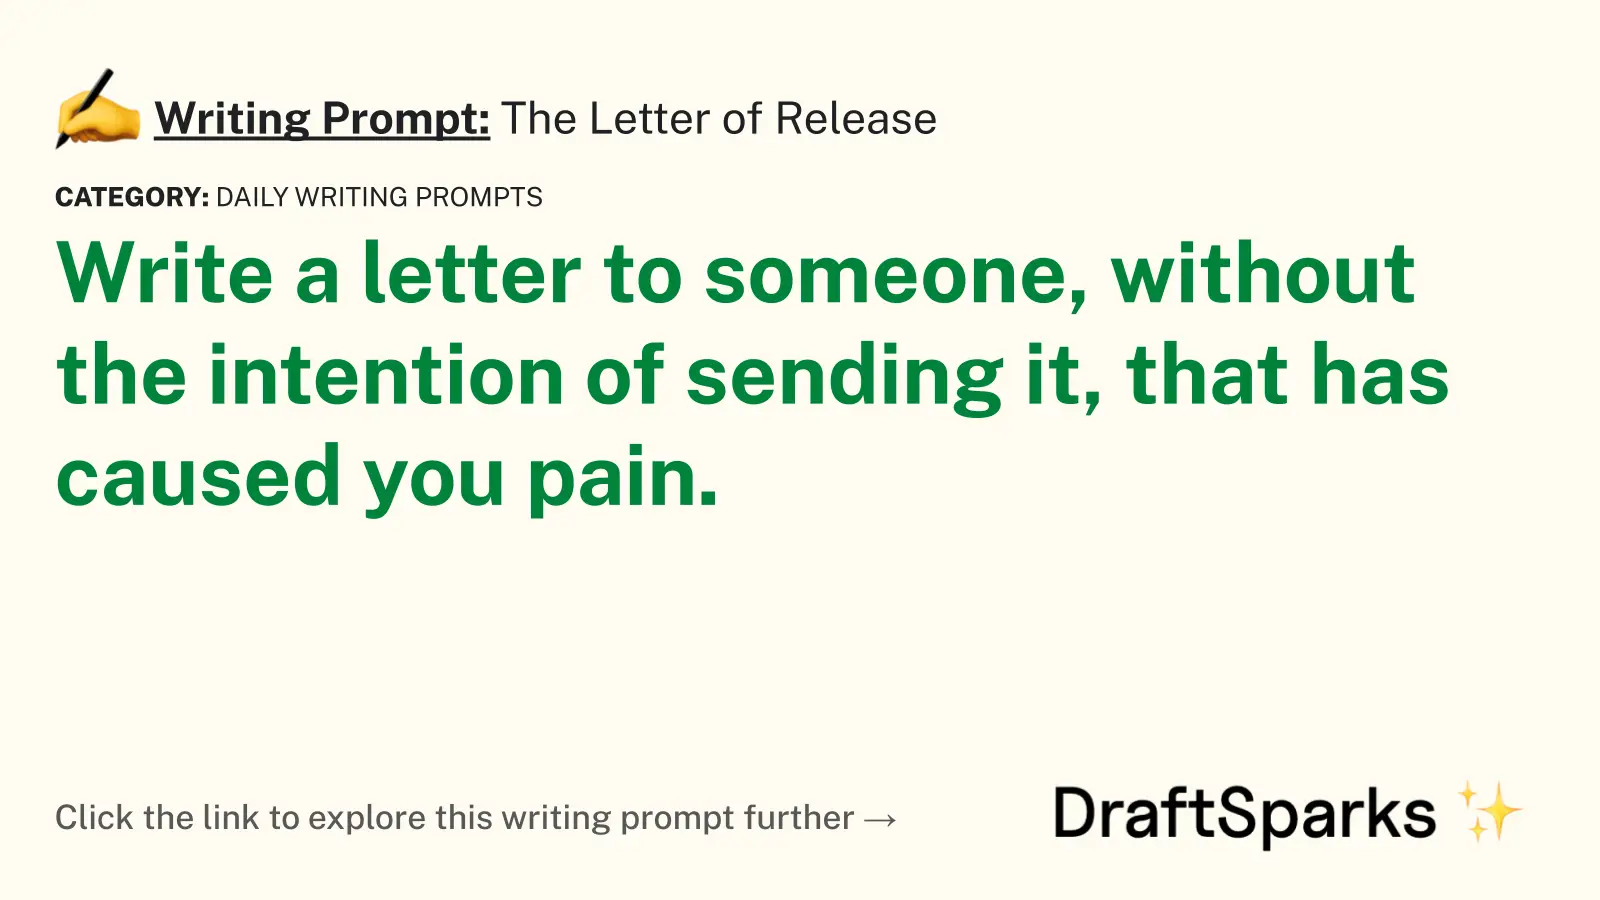 The Letter of Release